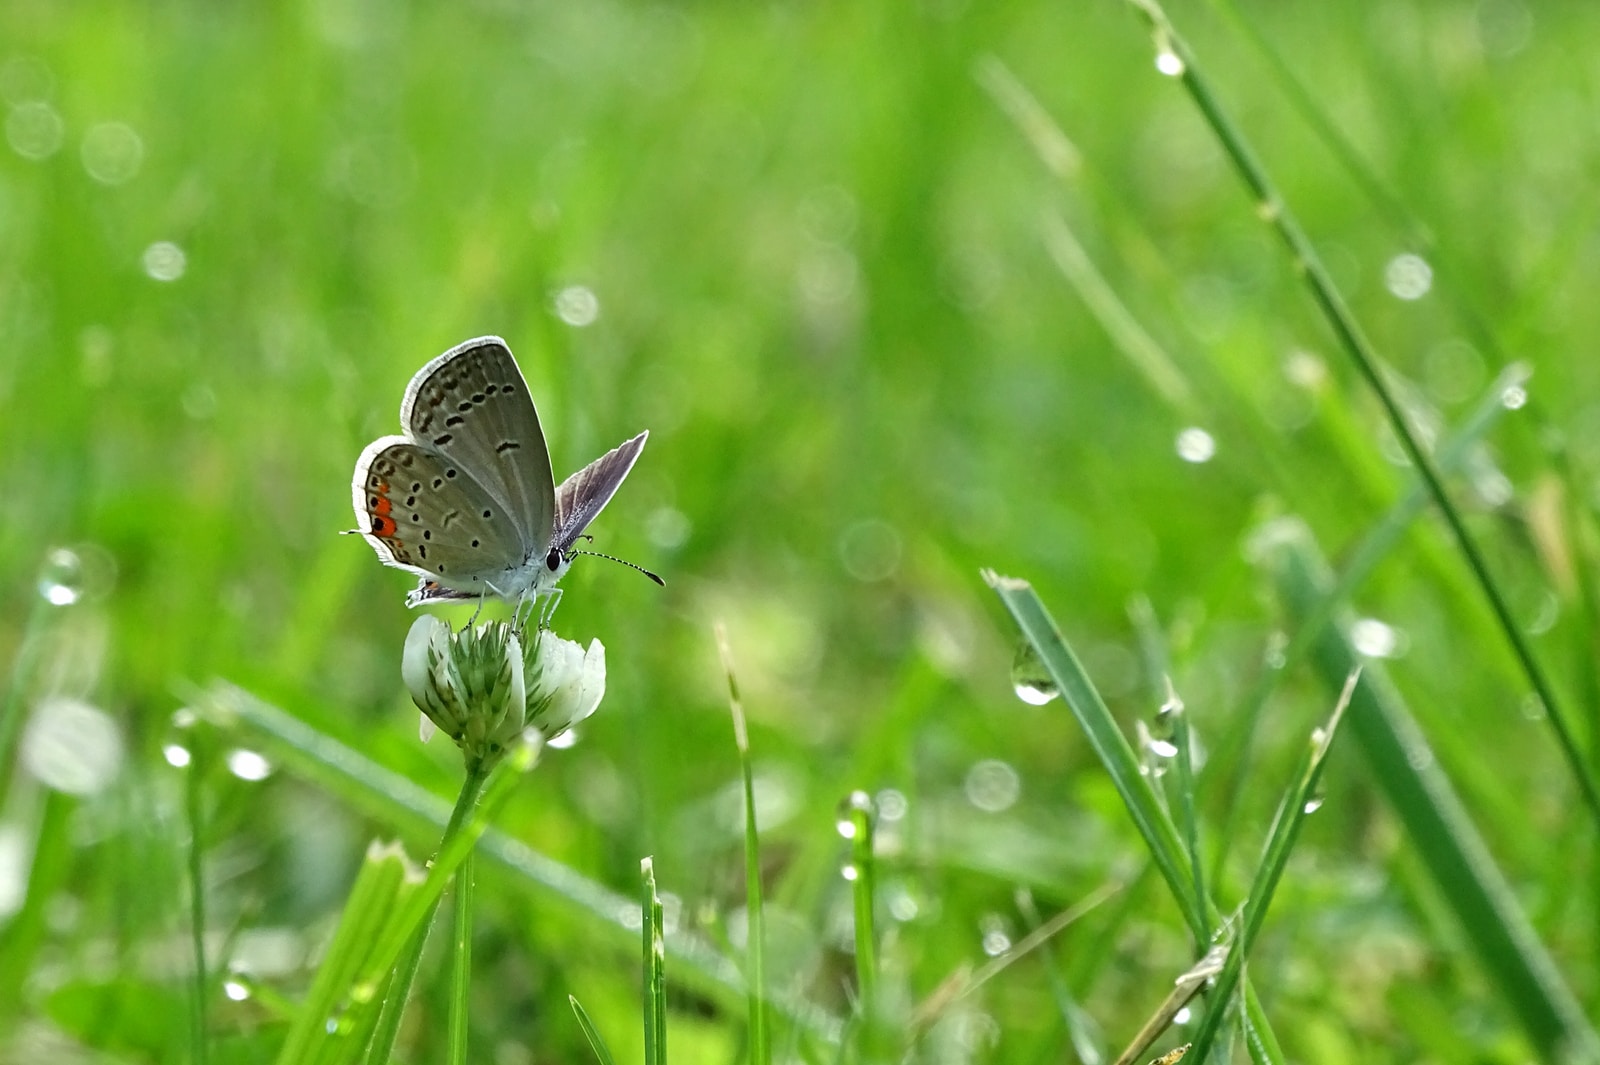 common blue butterfly perched on green grass in close up photography during daytime